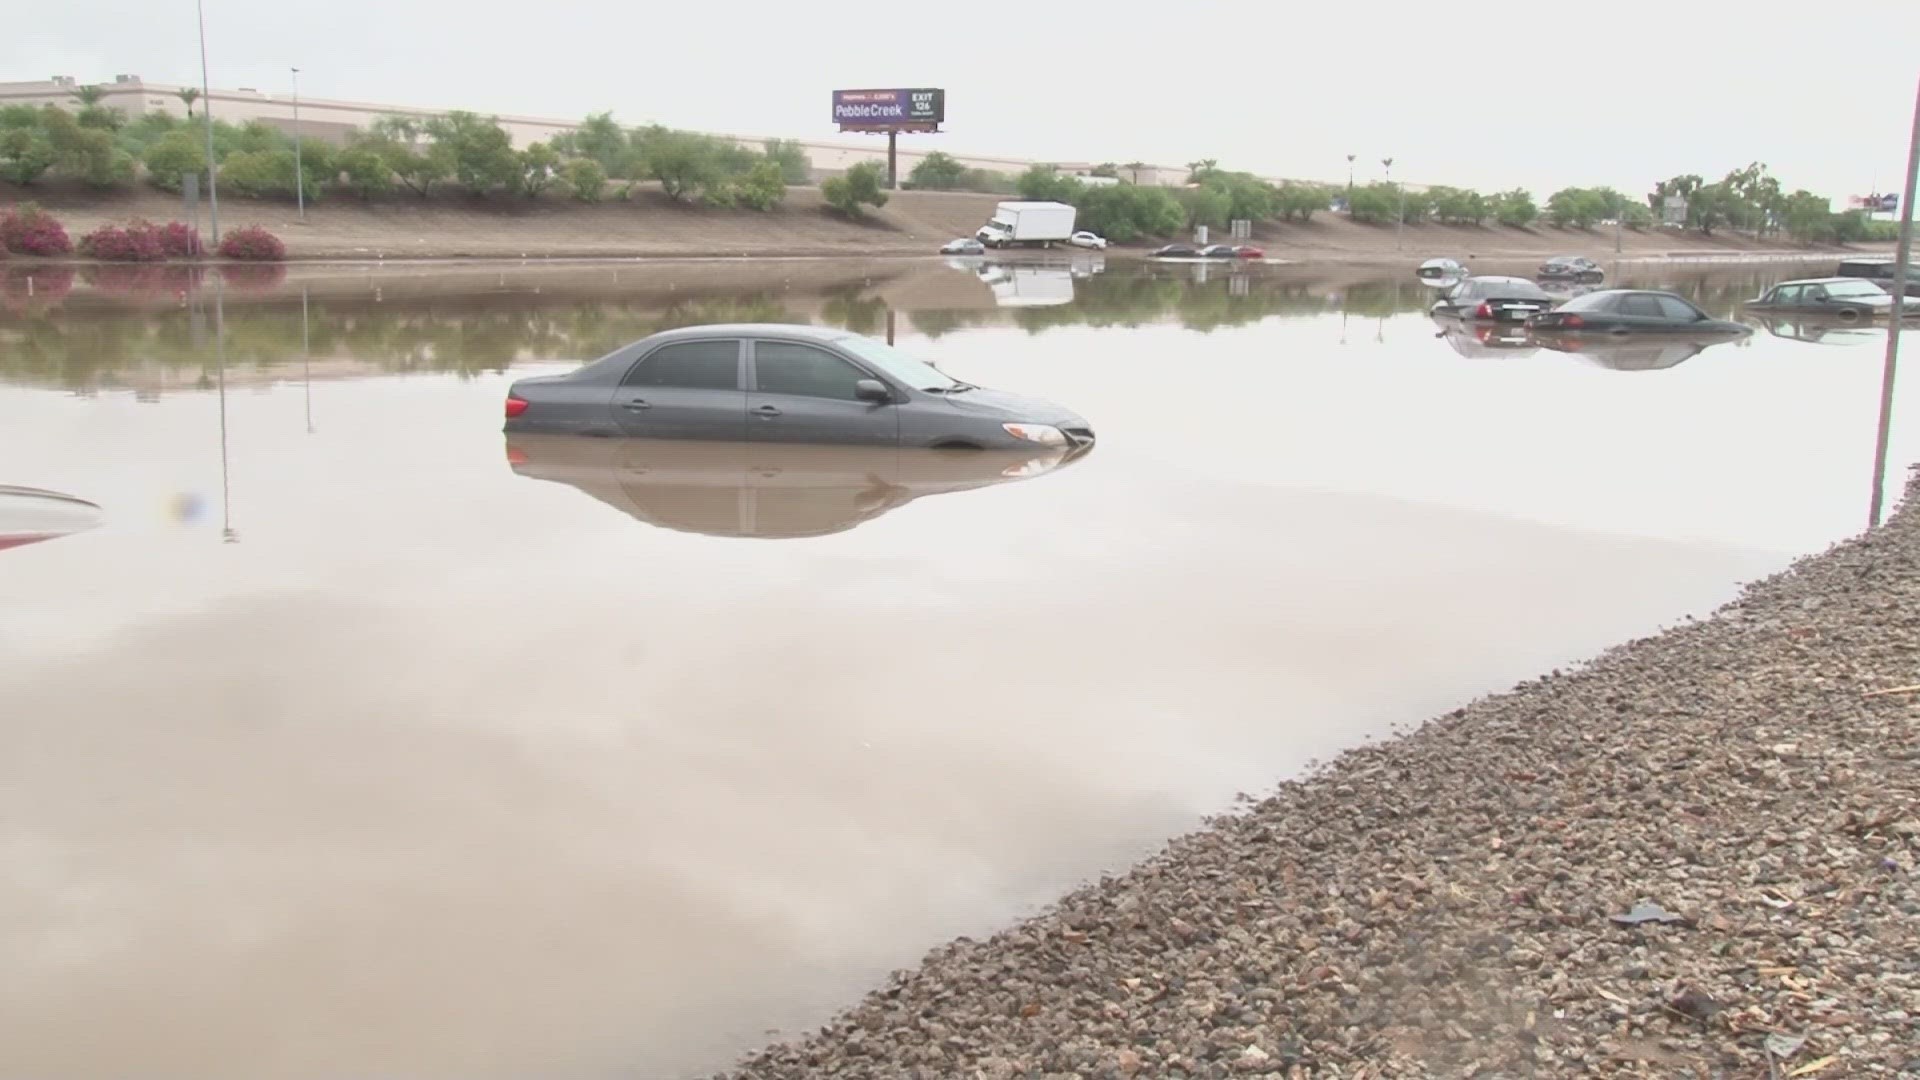 On Sept. 8, 2014, Sky Harbor Airport got nearly three and a half inches of rainfall.